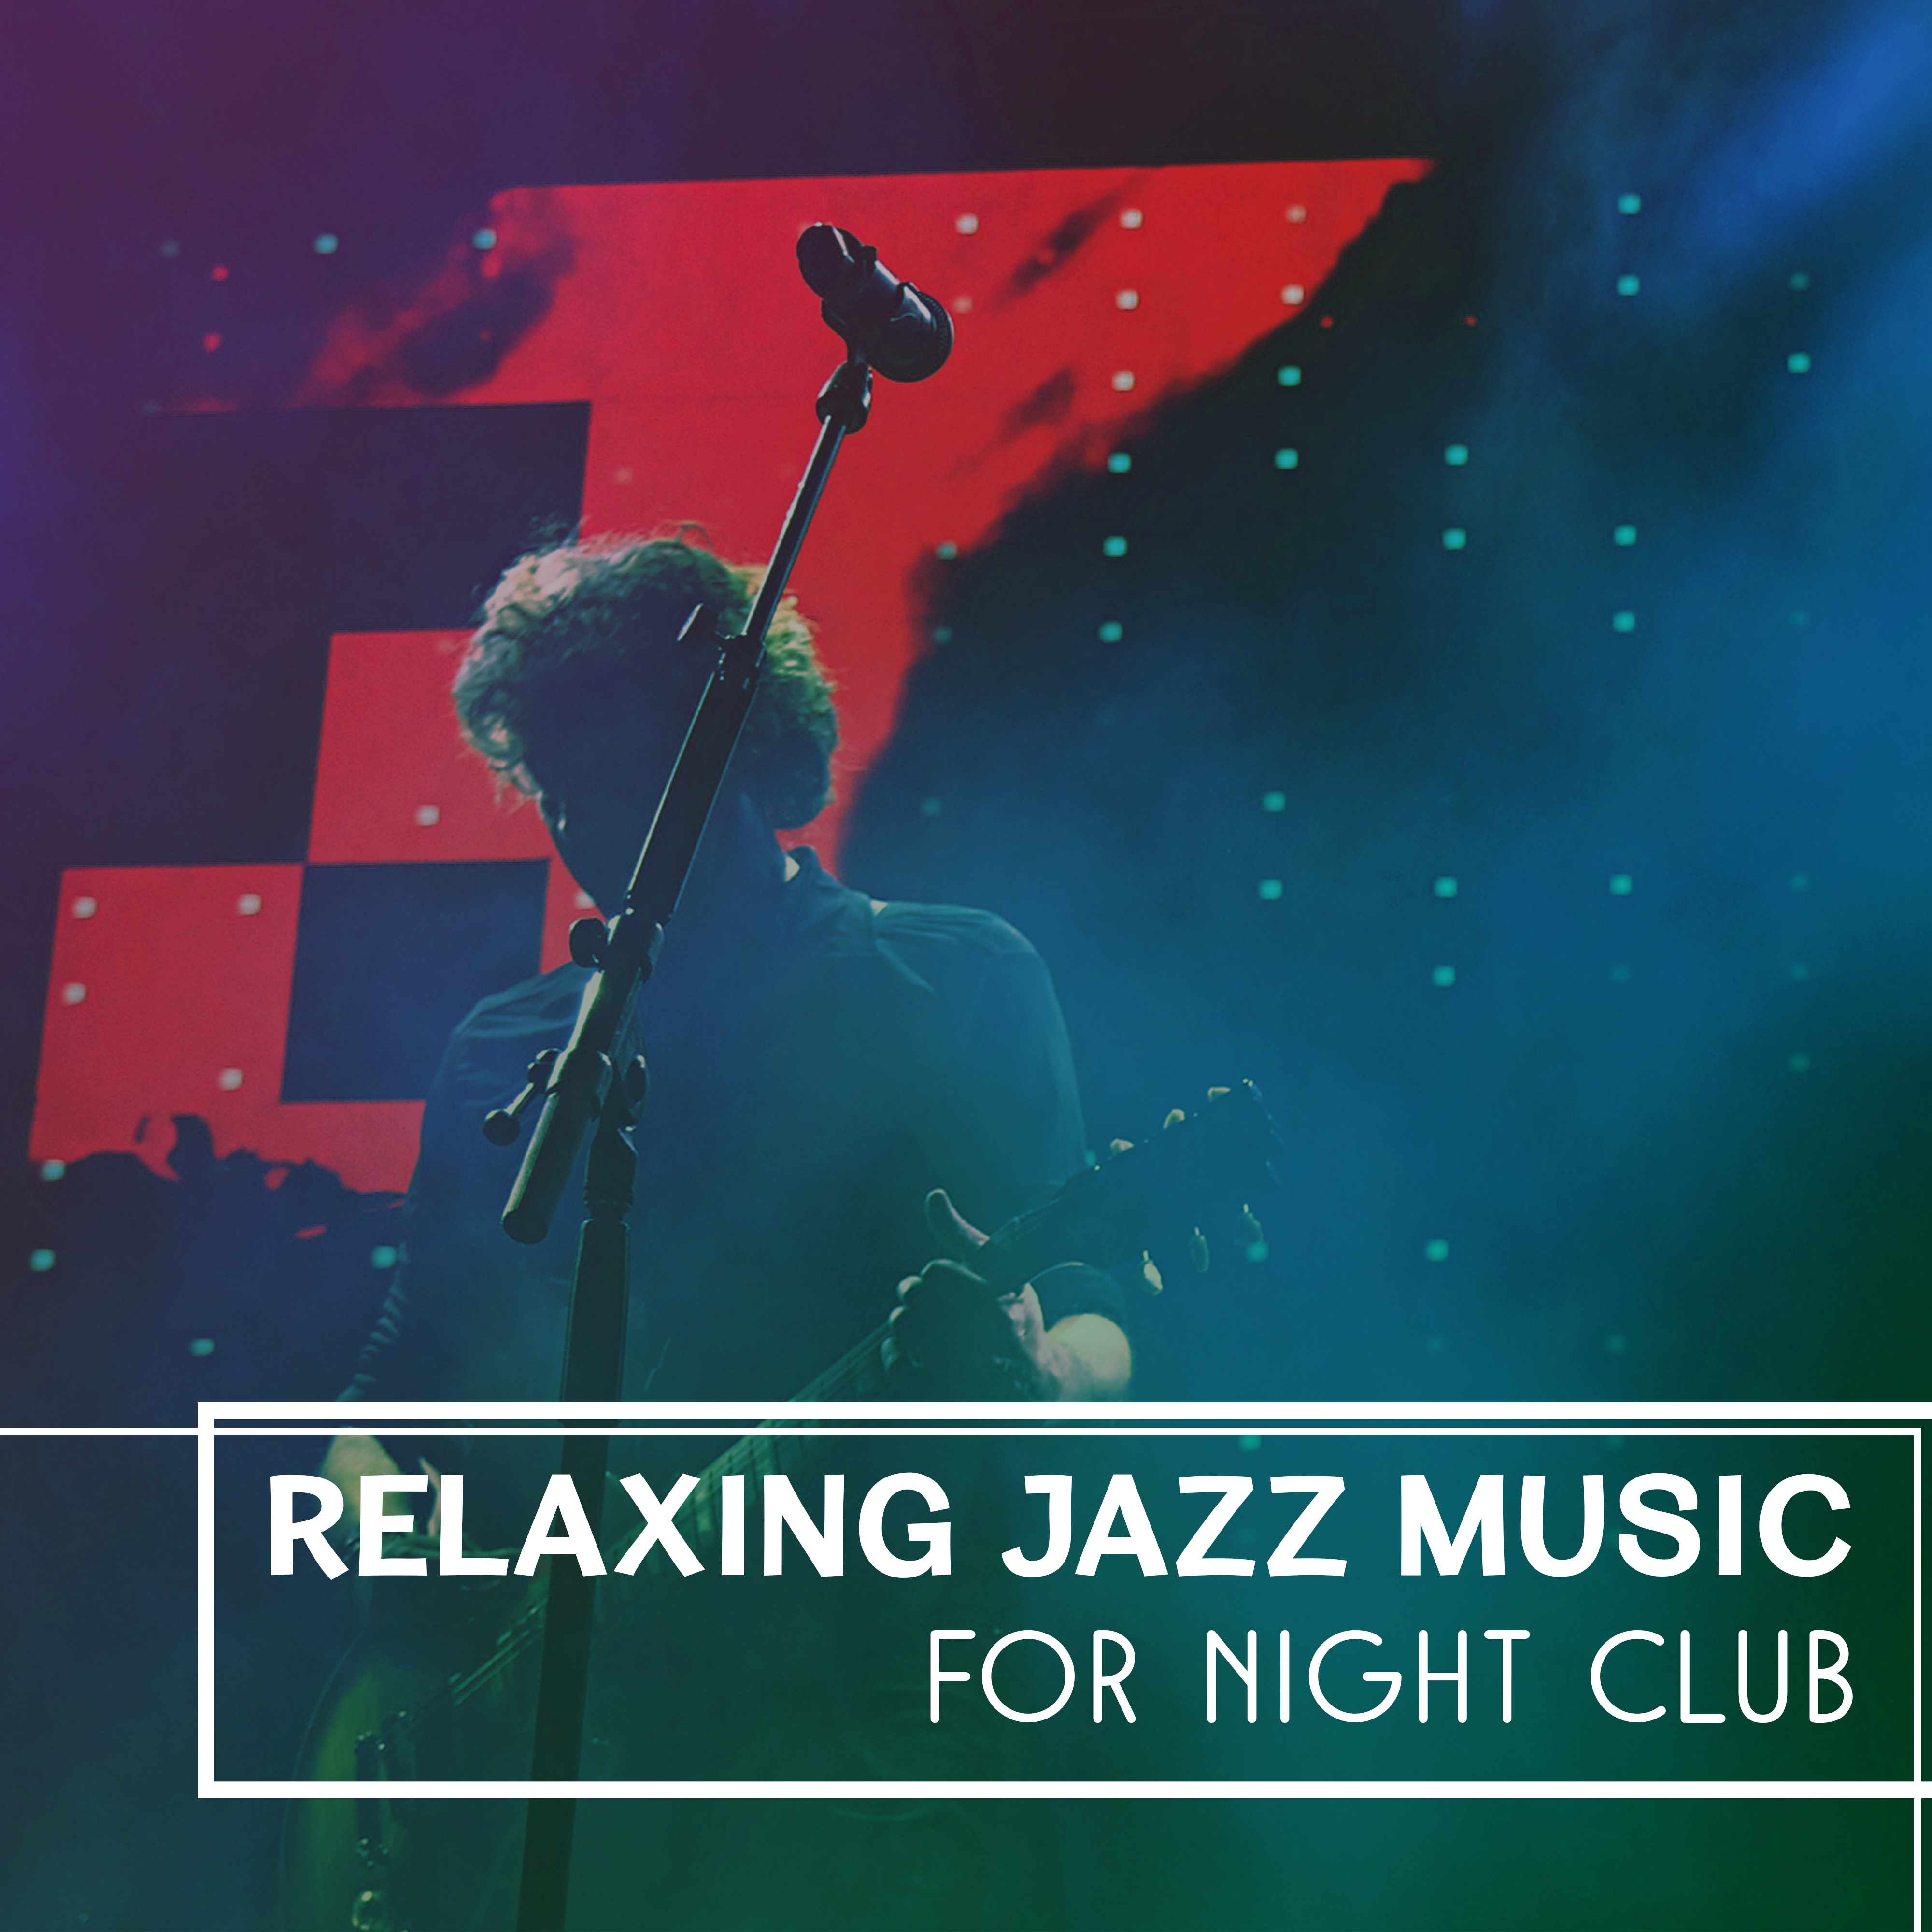 Relaxing Jazz Music for Night Club  Smooth Sounds to Relax, Jazz Music, Evening Jazz Session, Piano Bar